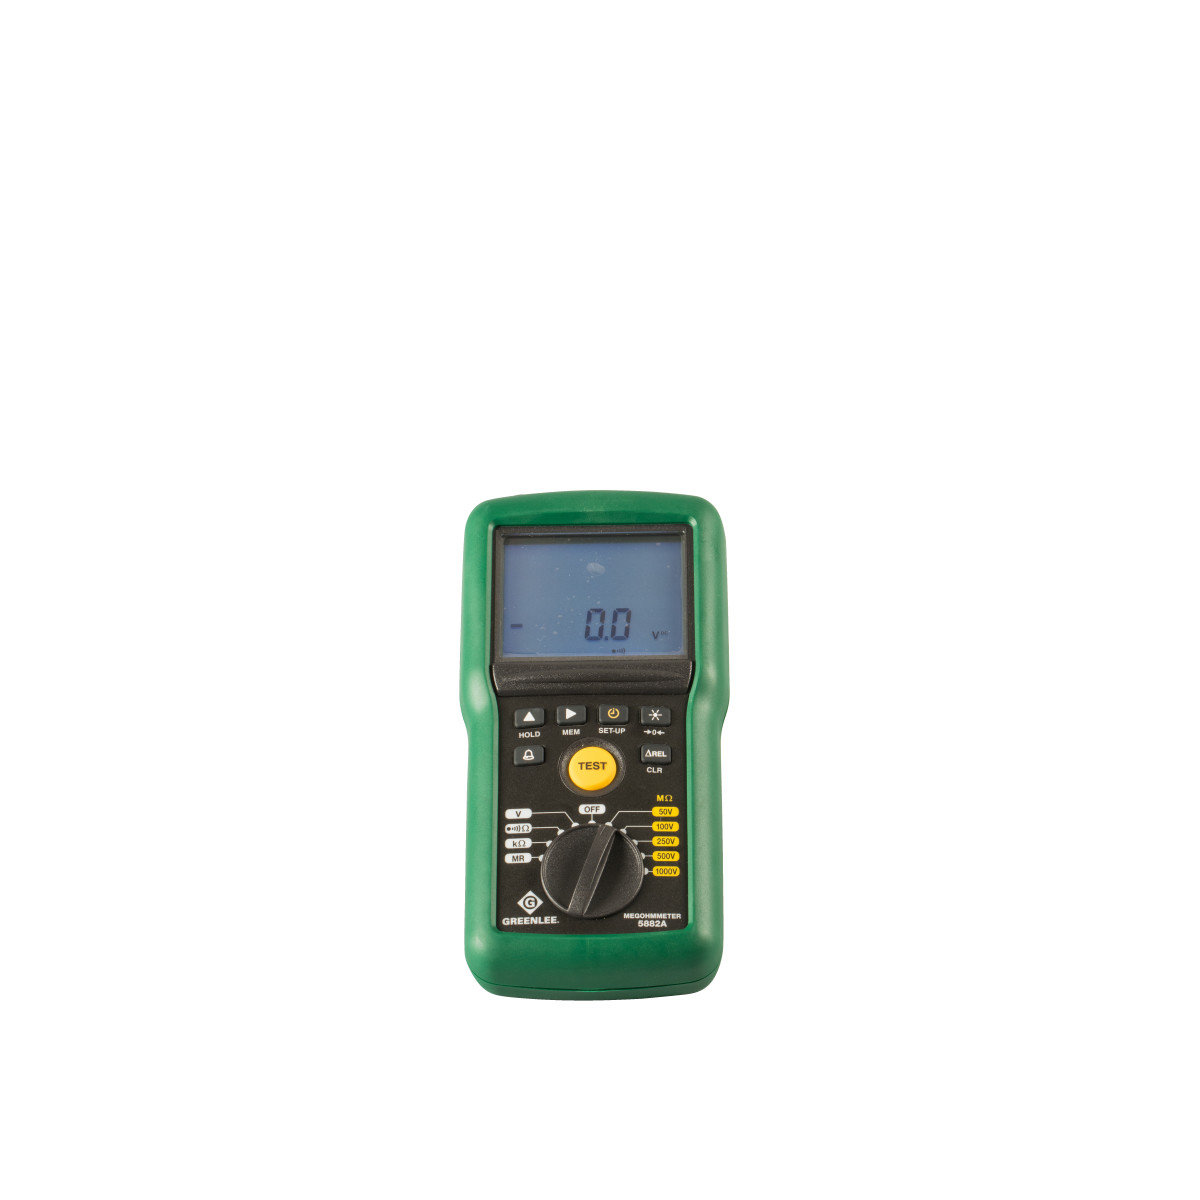 Megohmmeter/Insulation Tester 1kV.  Automatic calculations, potential indes and dielectric absorption ratios.  Tests continuity, resistance and frequency measurements.  Programmable alarms.  Insulation tests resistance continuity.  Hazardous voltage...